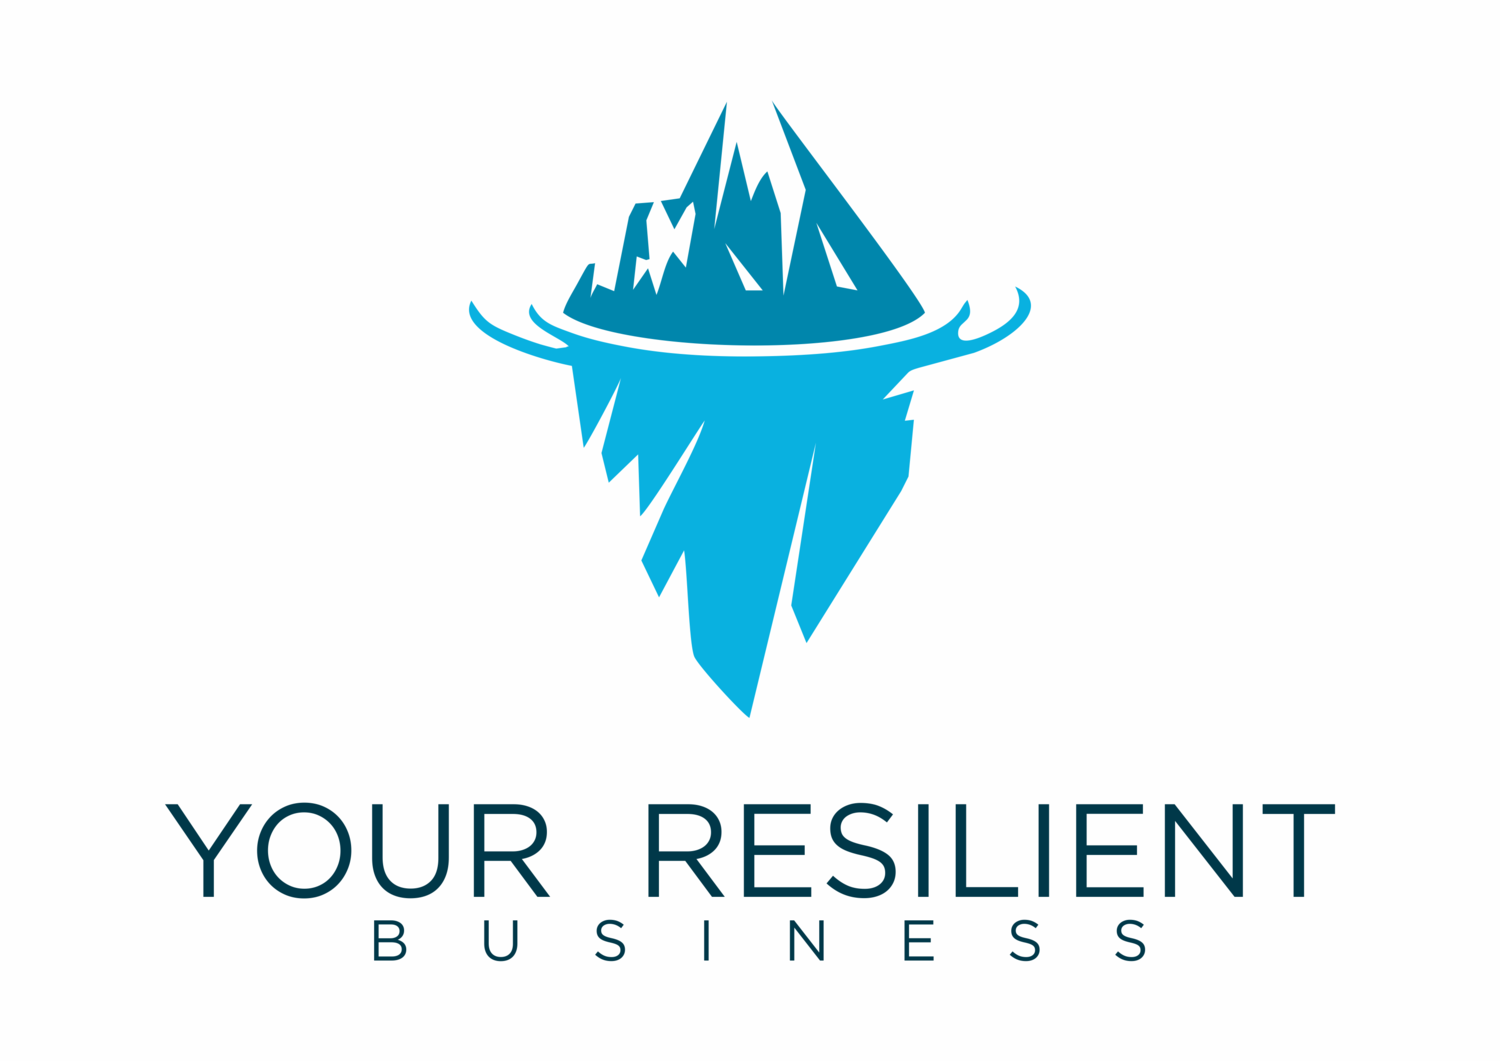 Your Resilient Business